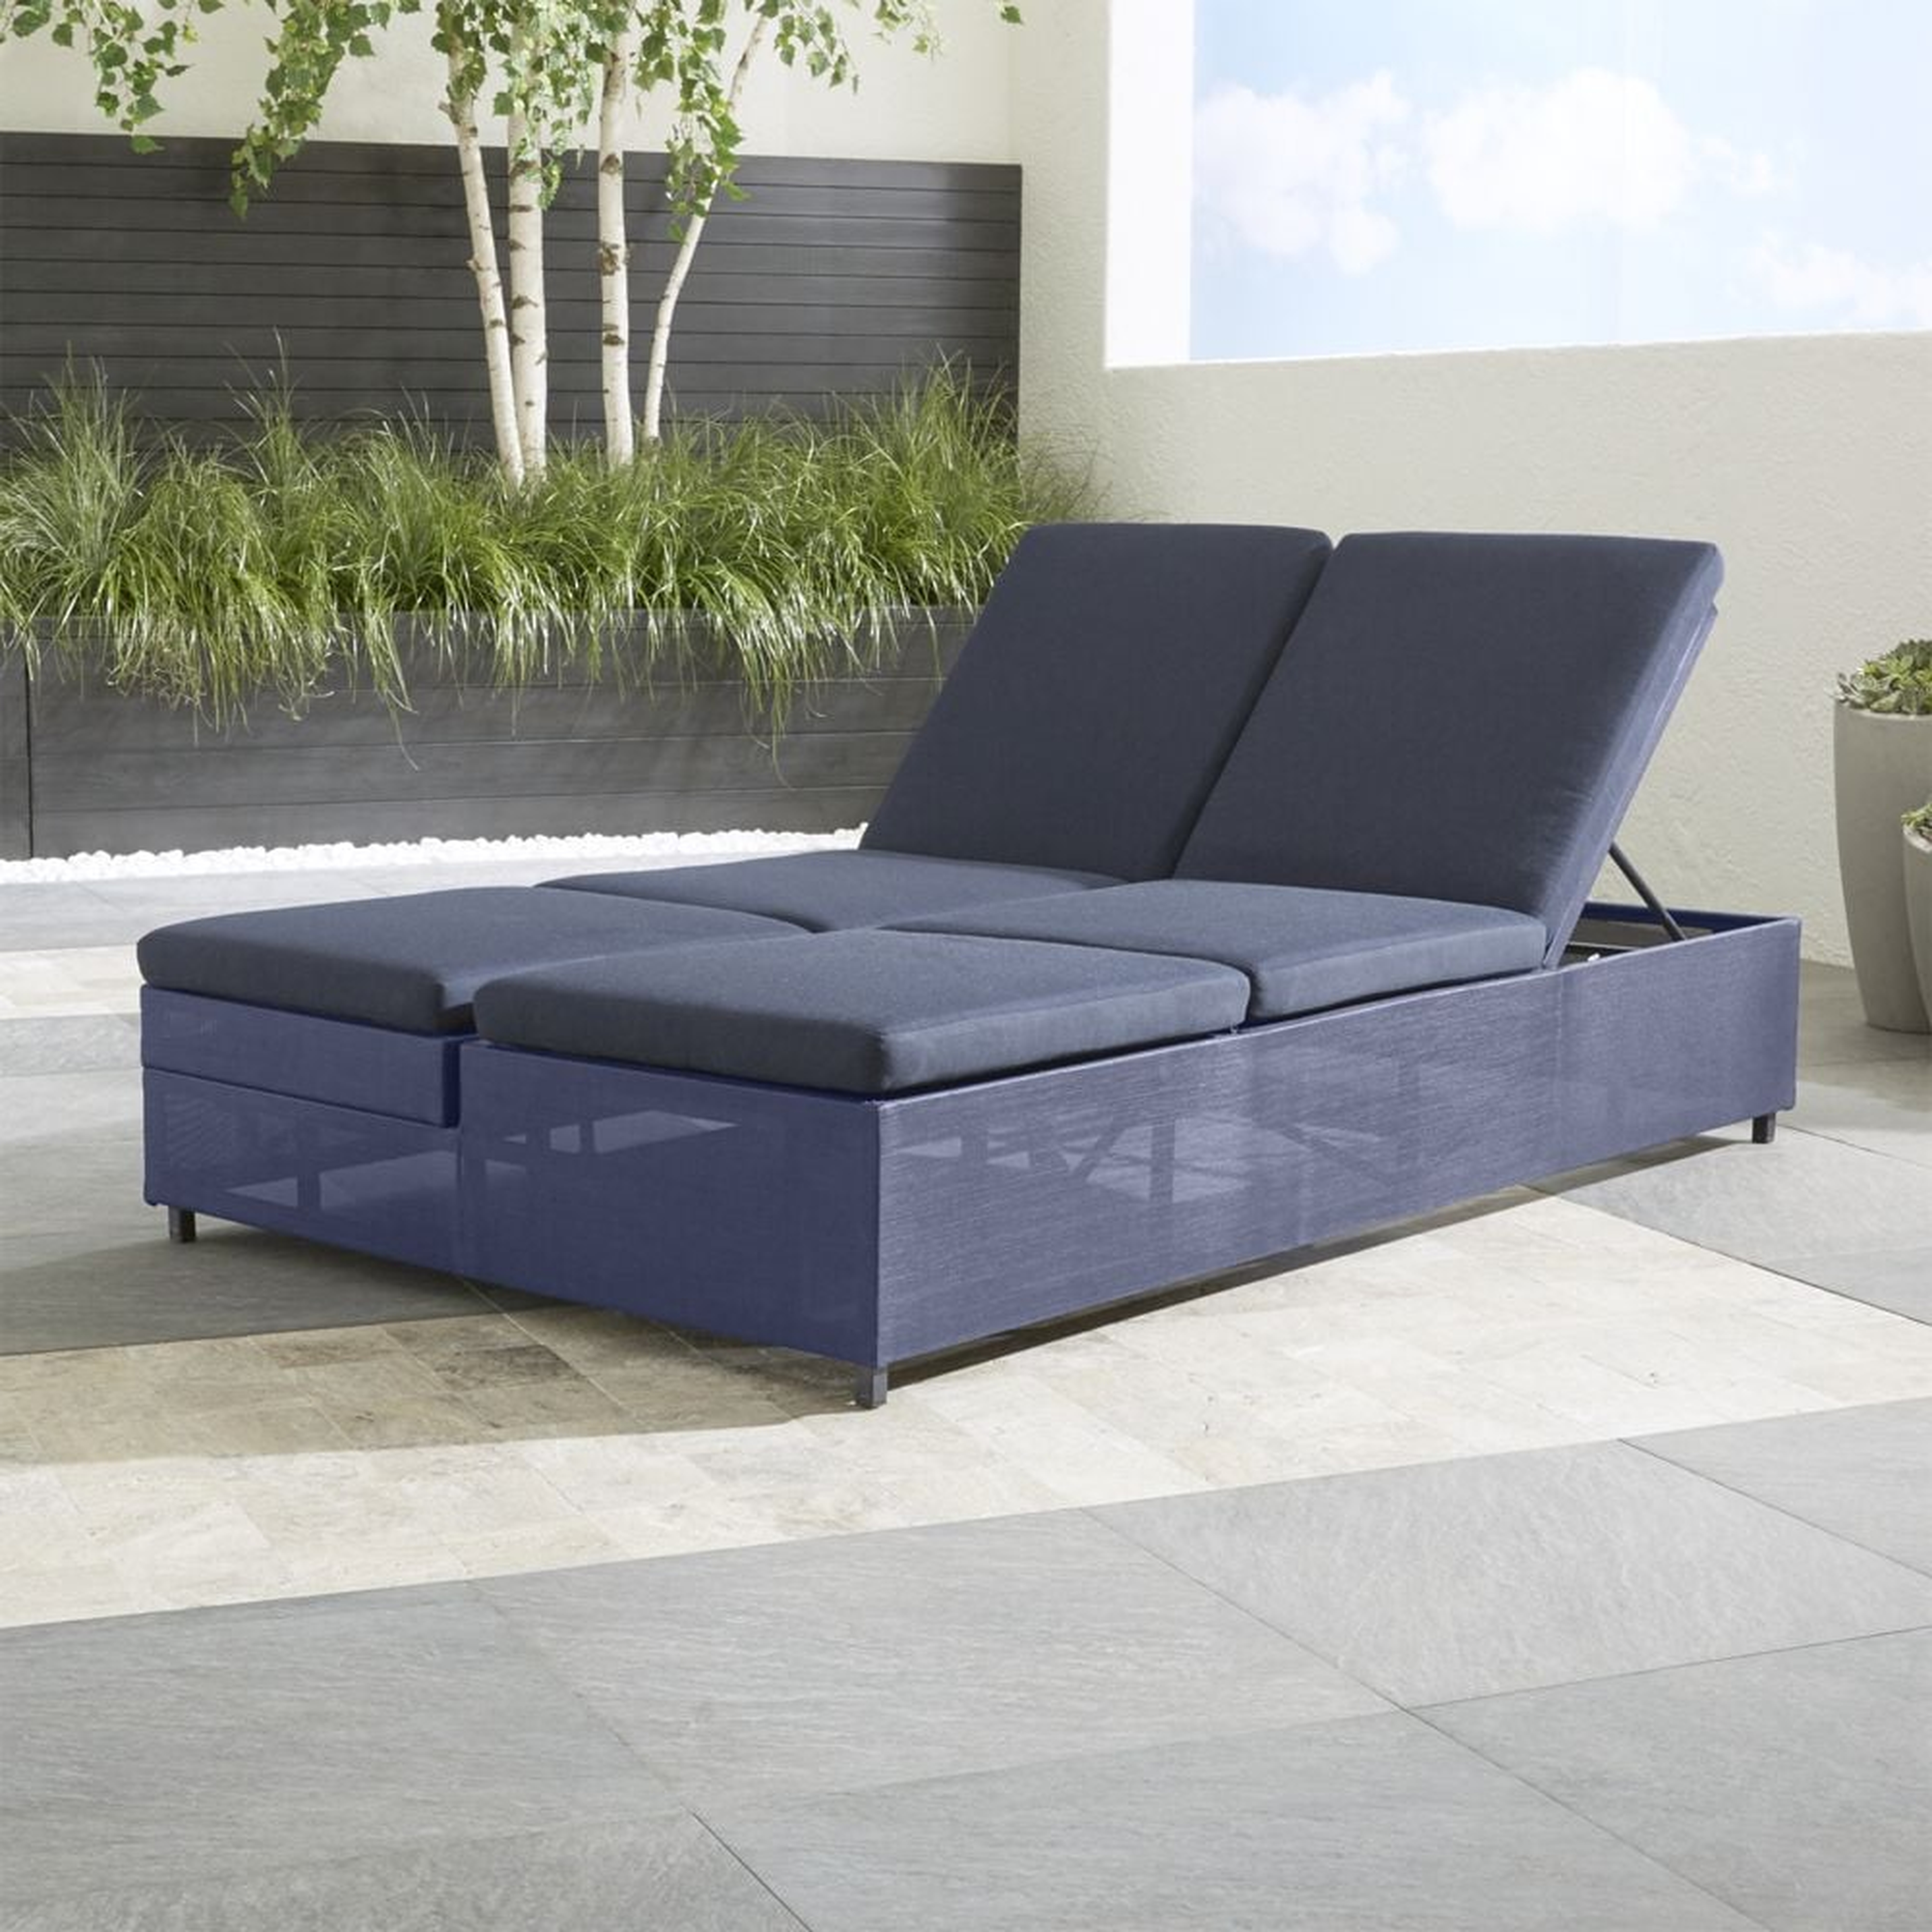 Dune Navy Double Outdoor Chaise Sofa Lounge with Sunbrella Â® Cushions - Crate and Barrel